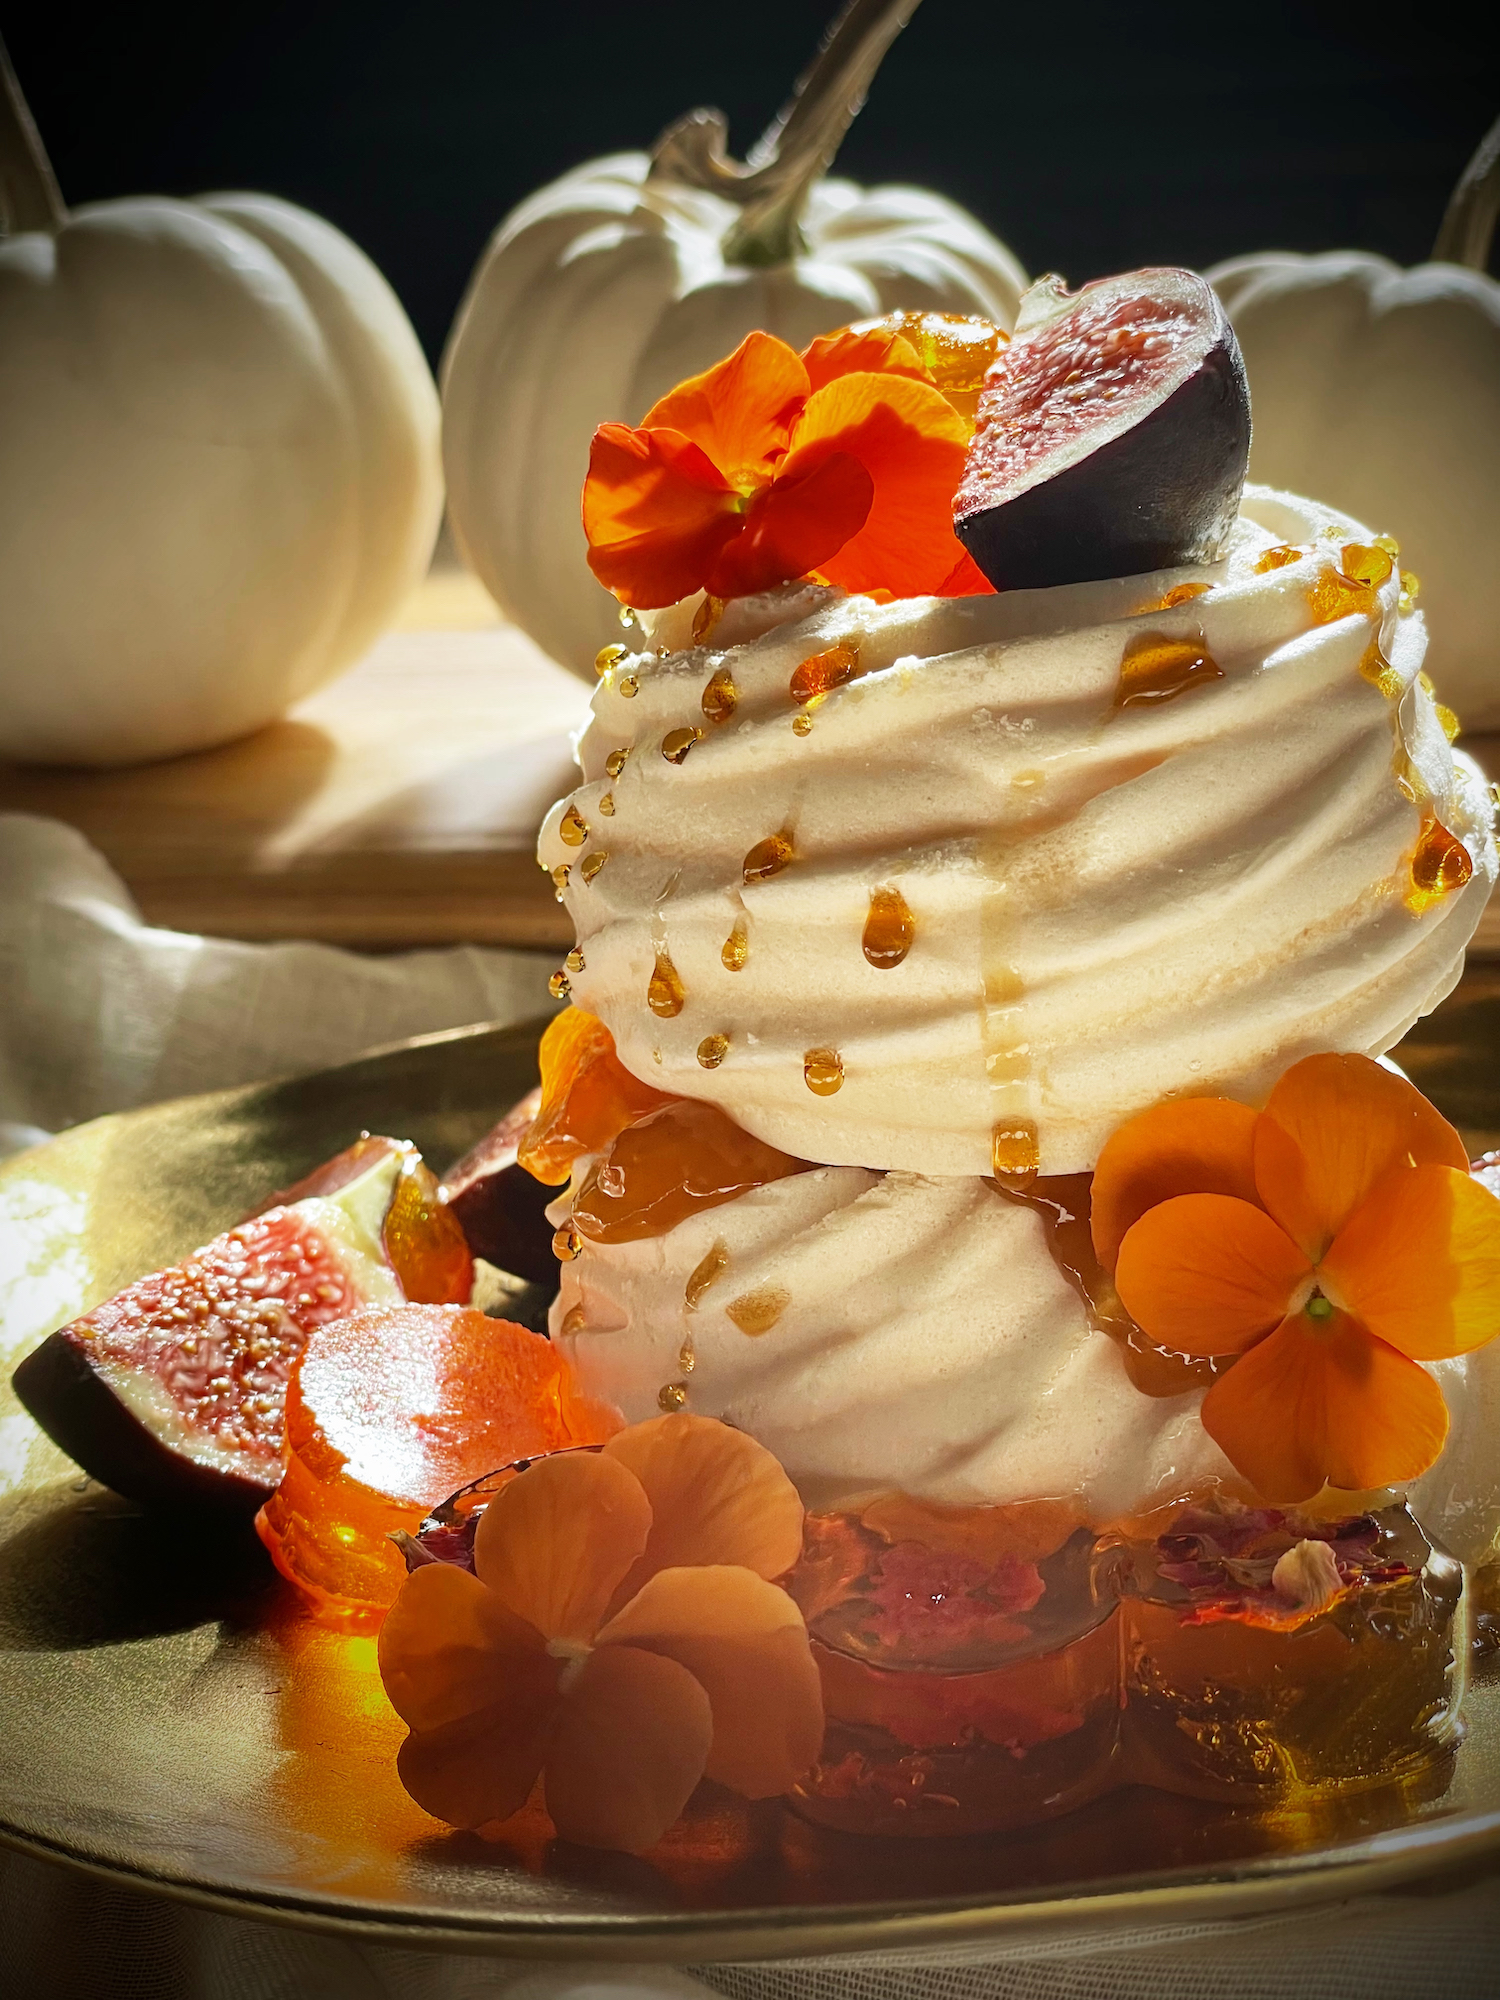 Meringue nests stuffed with honey and edible flowers. Garnished with seasonal figs